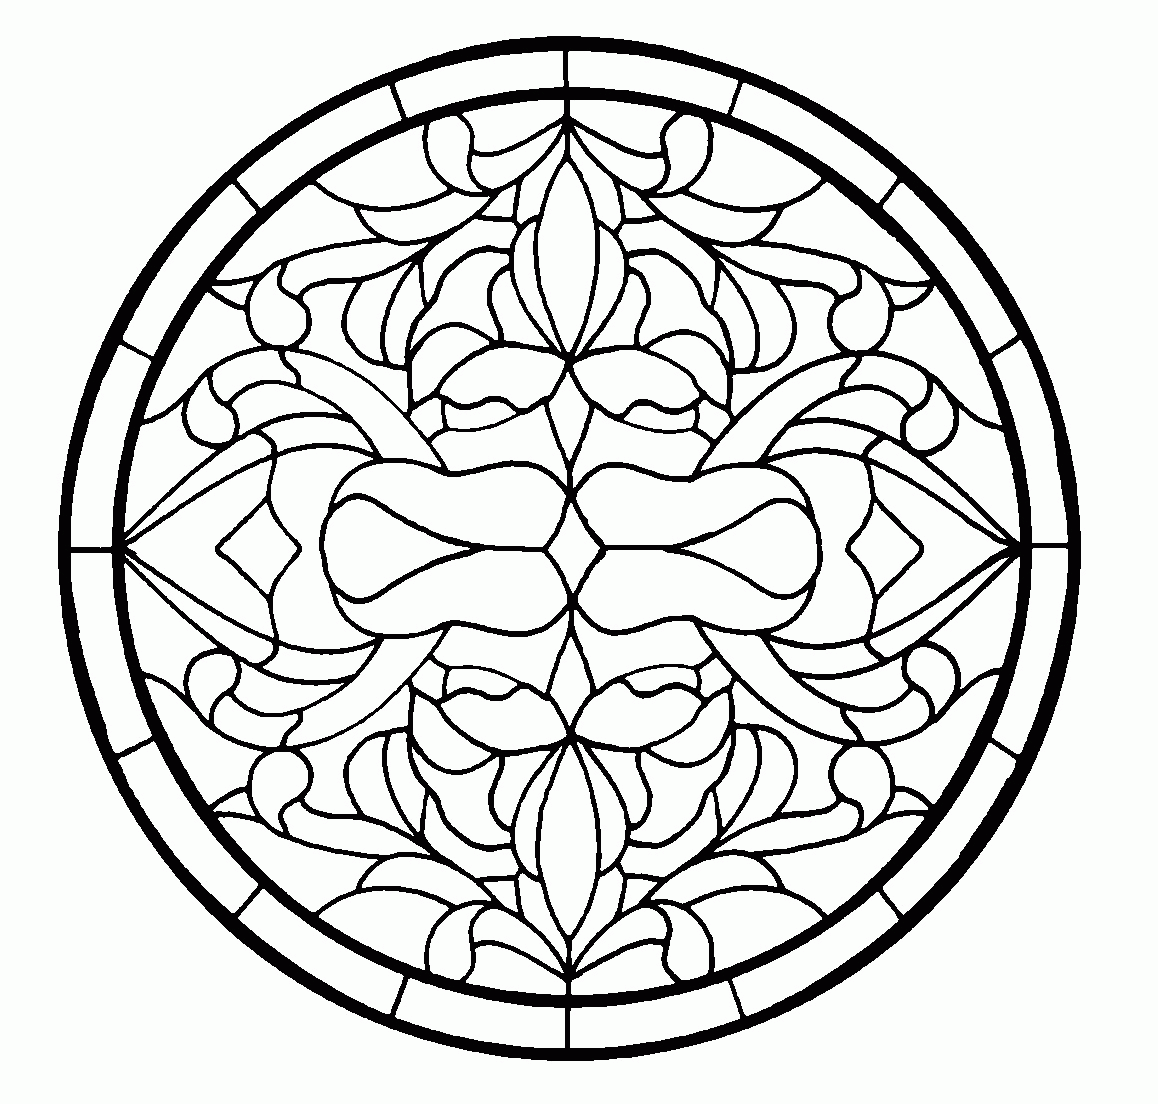 coloring-pages-mosaic-patterns-beginner-coloring-pages